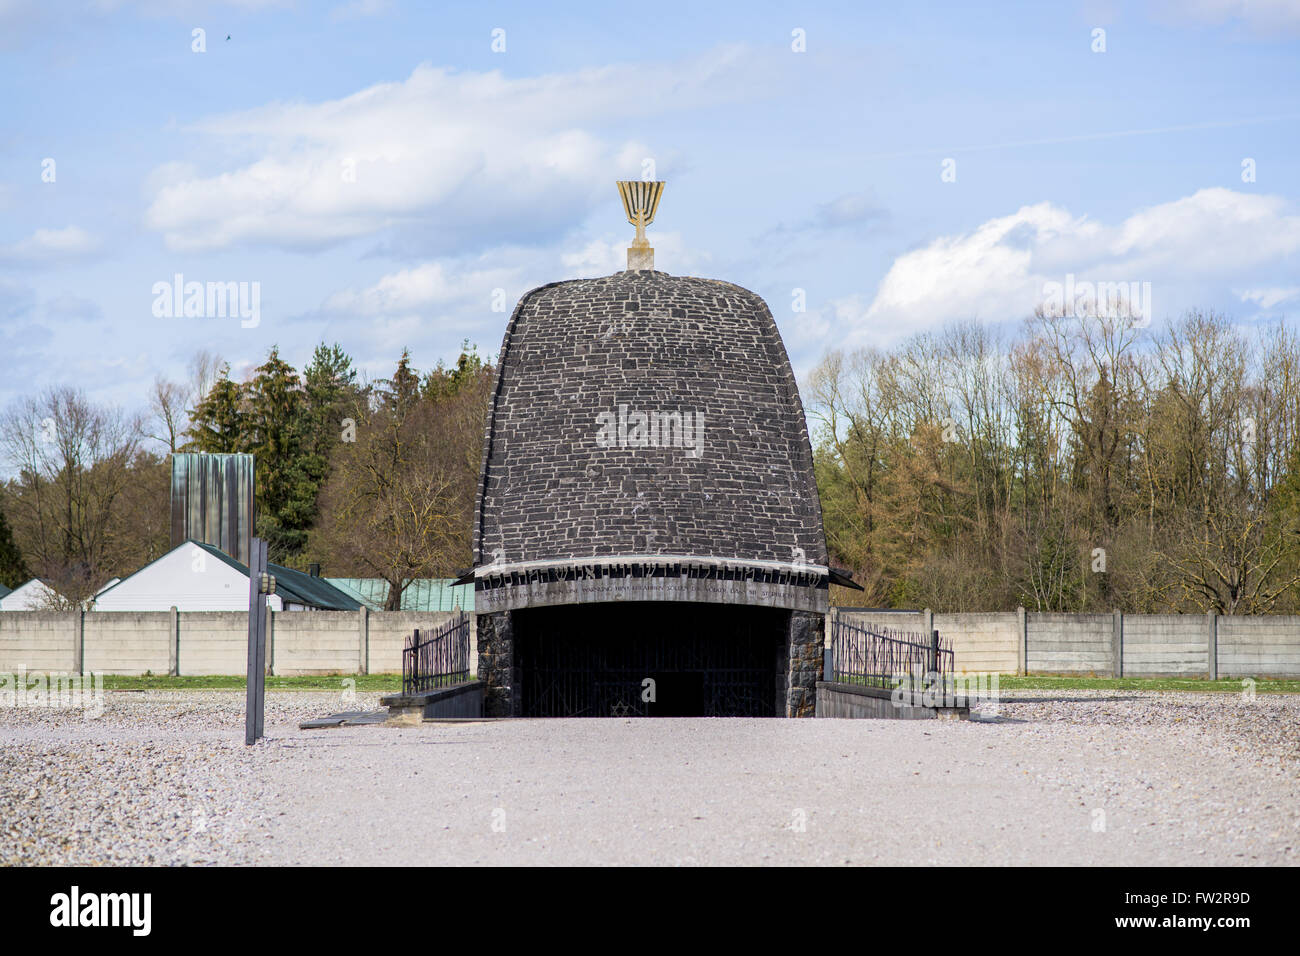 Jewish memorial in Dachau concentration camp Stock Photo